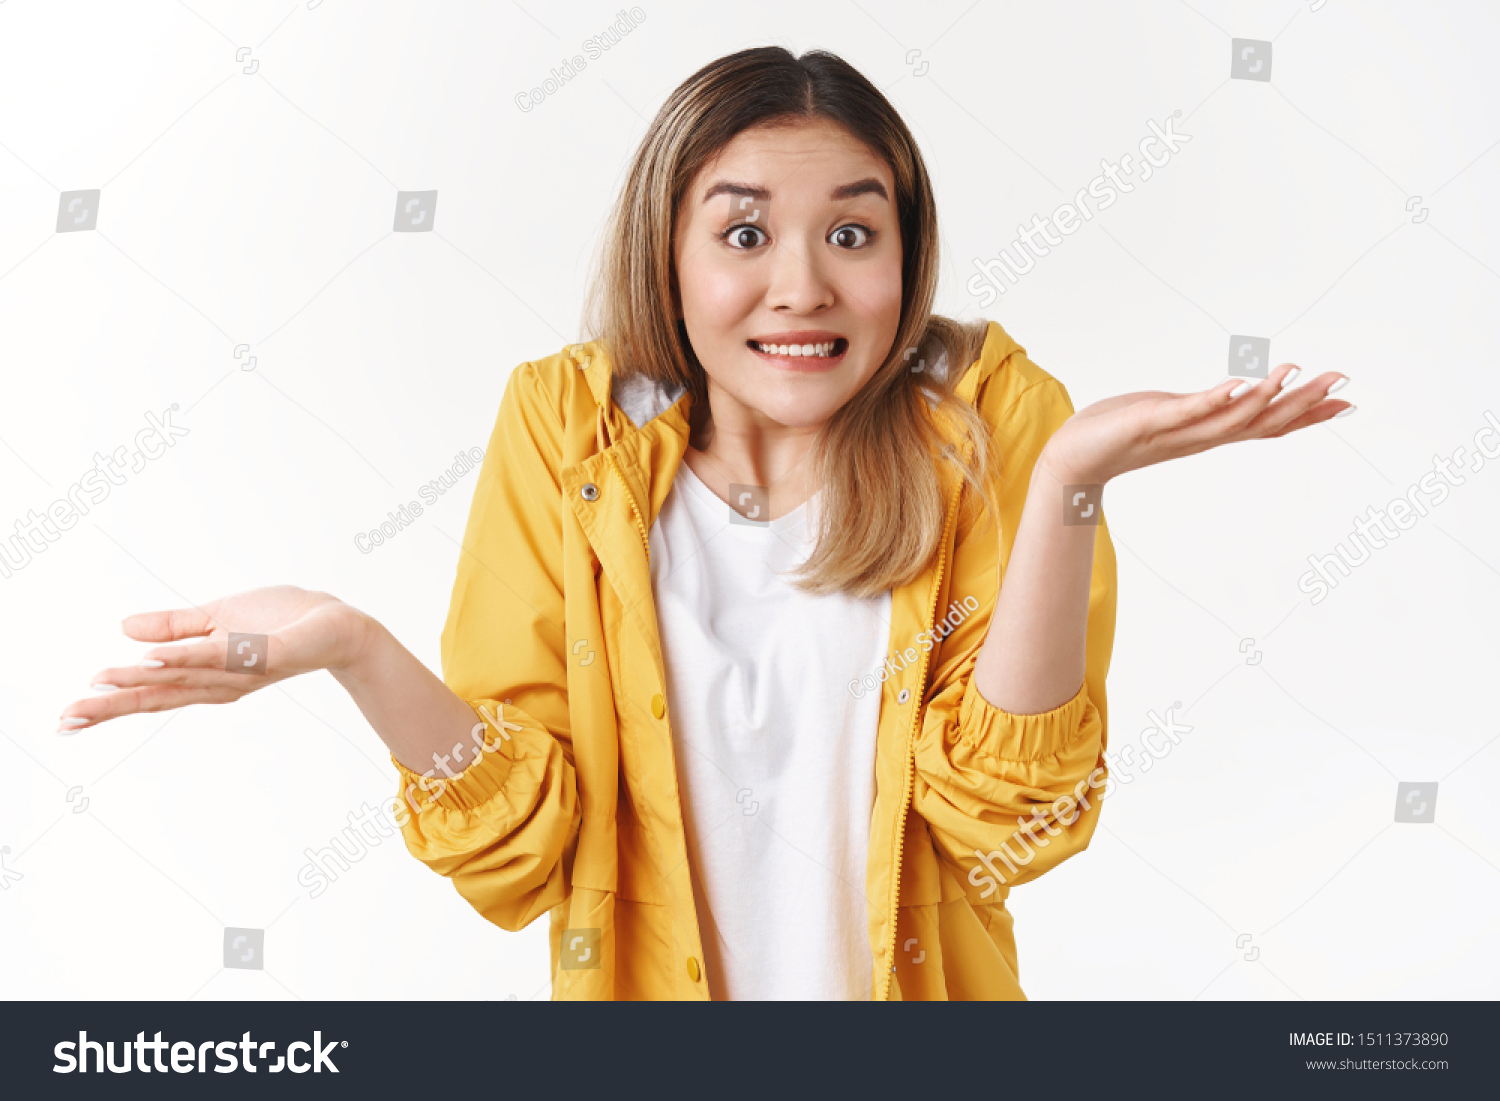 Yikes sorry not knew. Awkward cheerful blond asian woman shrugging hands spread sideways unaware questioned perplexed answer clench teeth uncertain expression clueless say, white background #1511373890